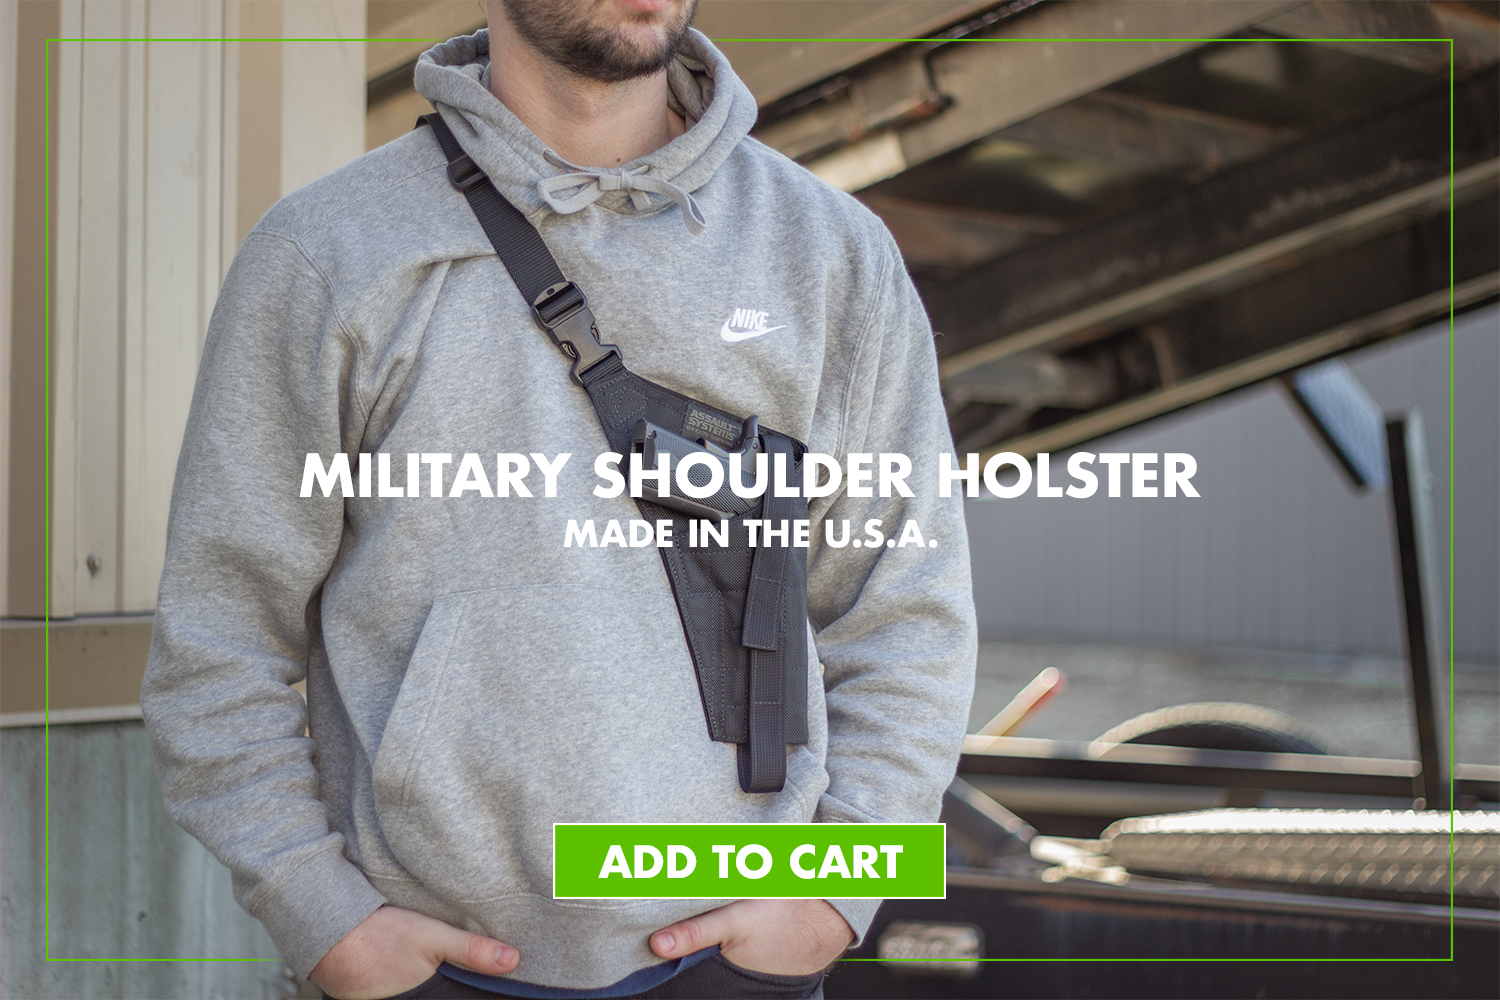 Military Shoulder Holster by Elite Survival - Versatile and rugged holster for your firearm